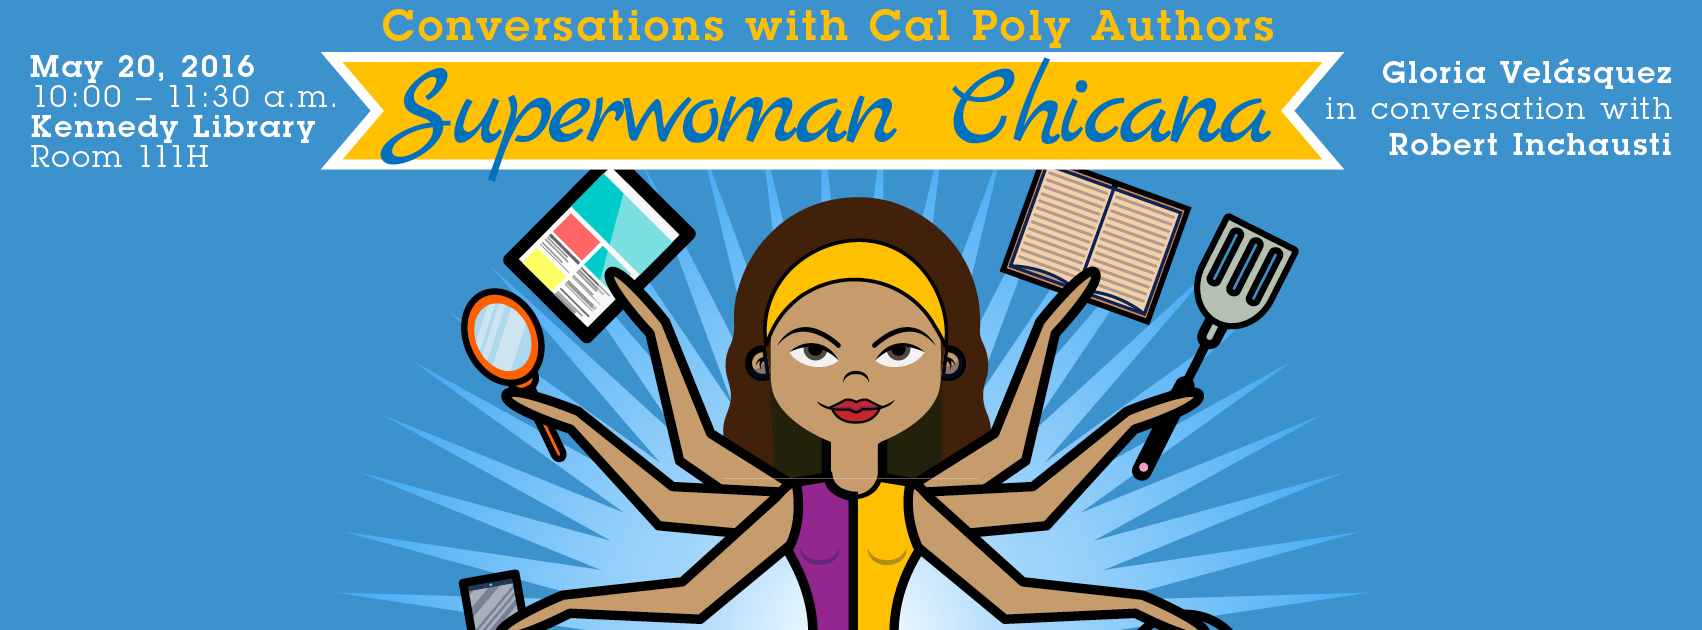 Conversations with Cal Poly Authors Superwoman Chicana 